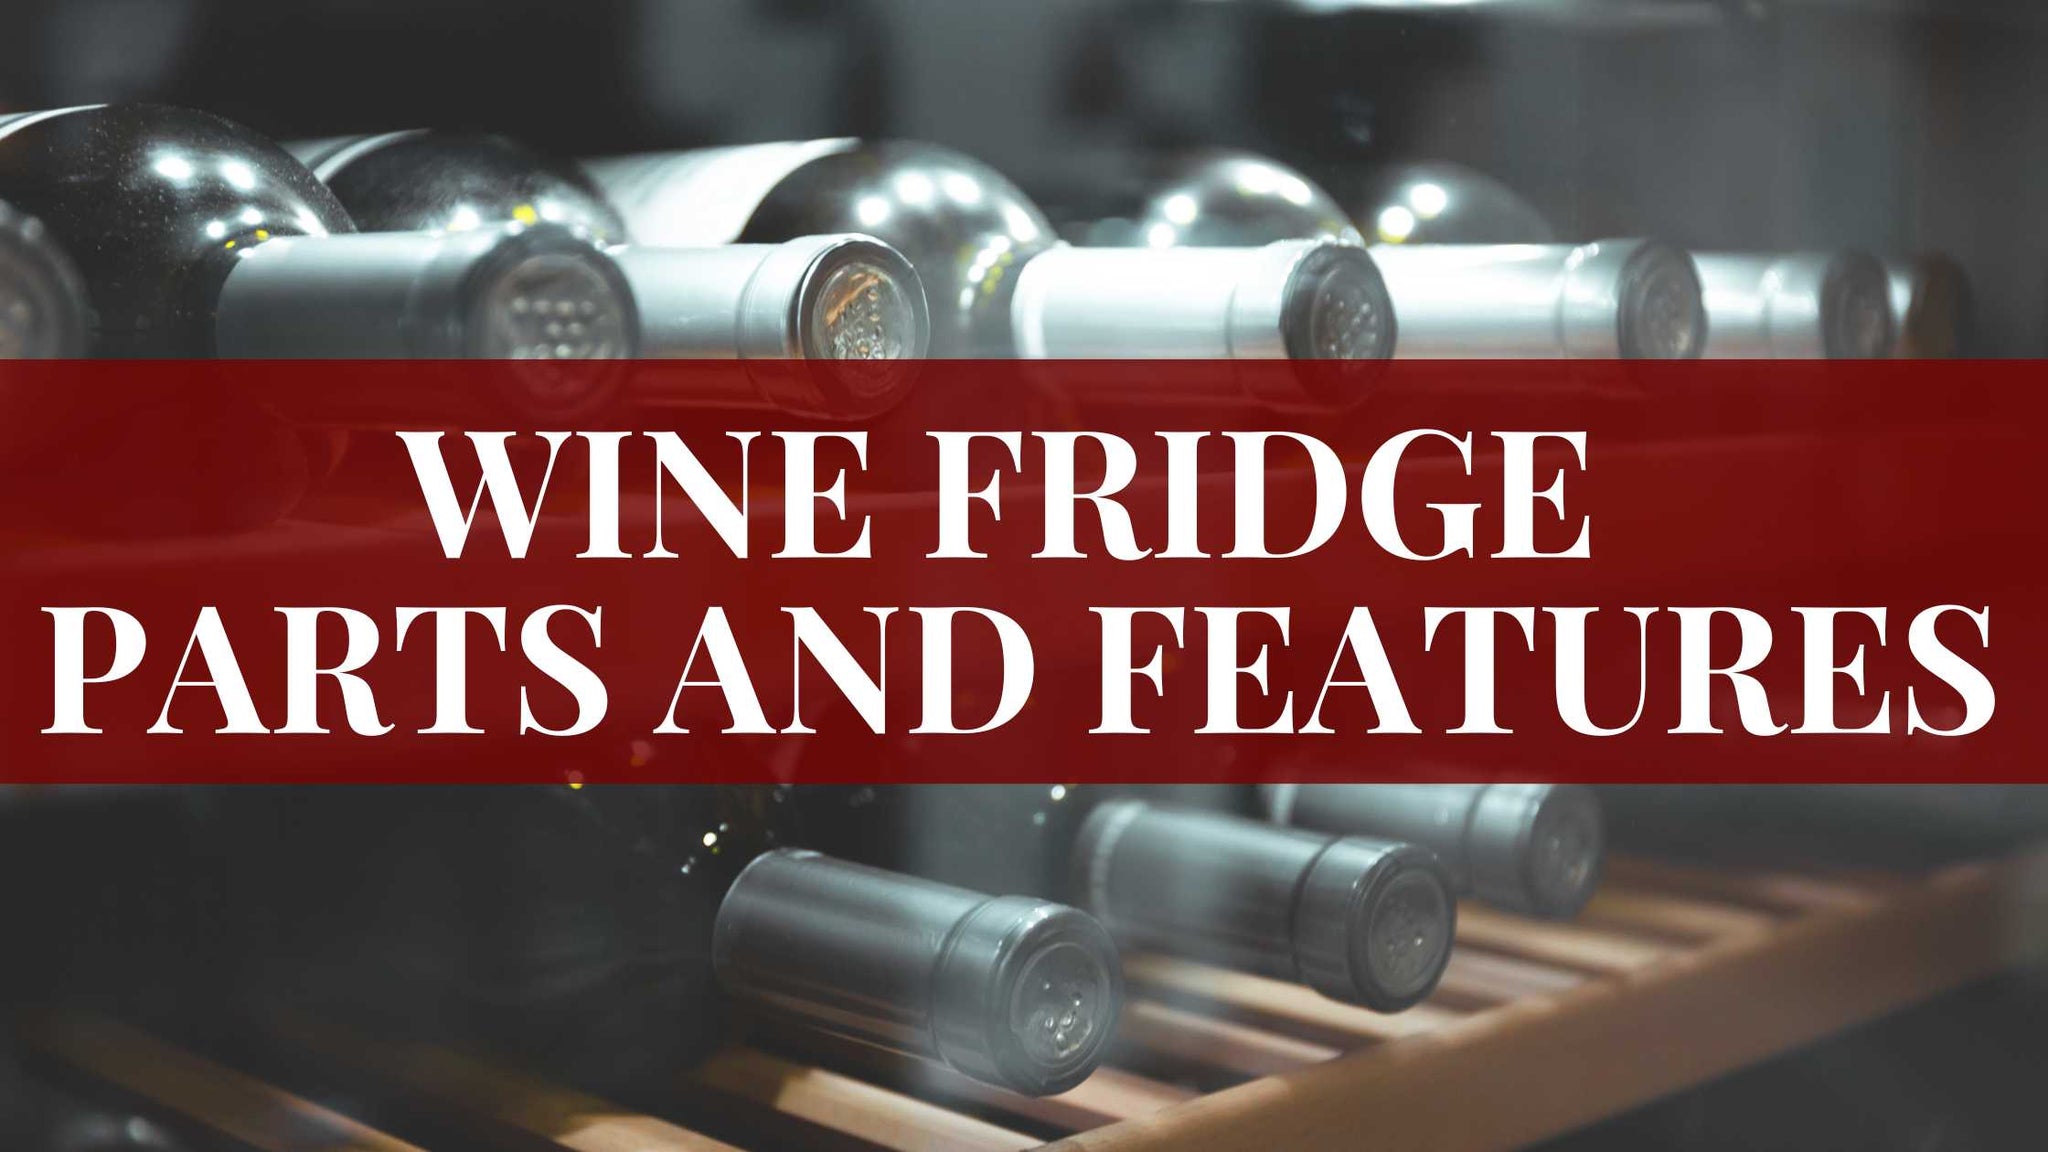 Wine Fridge Parts and Features